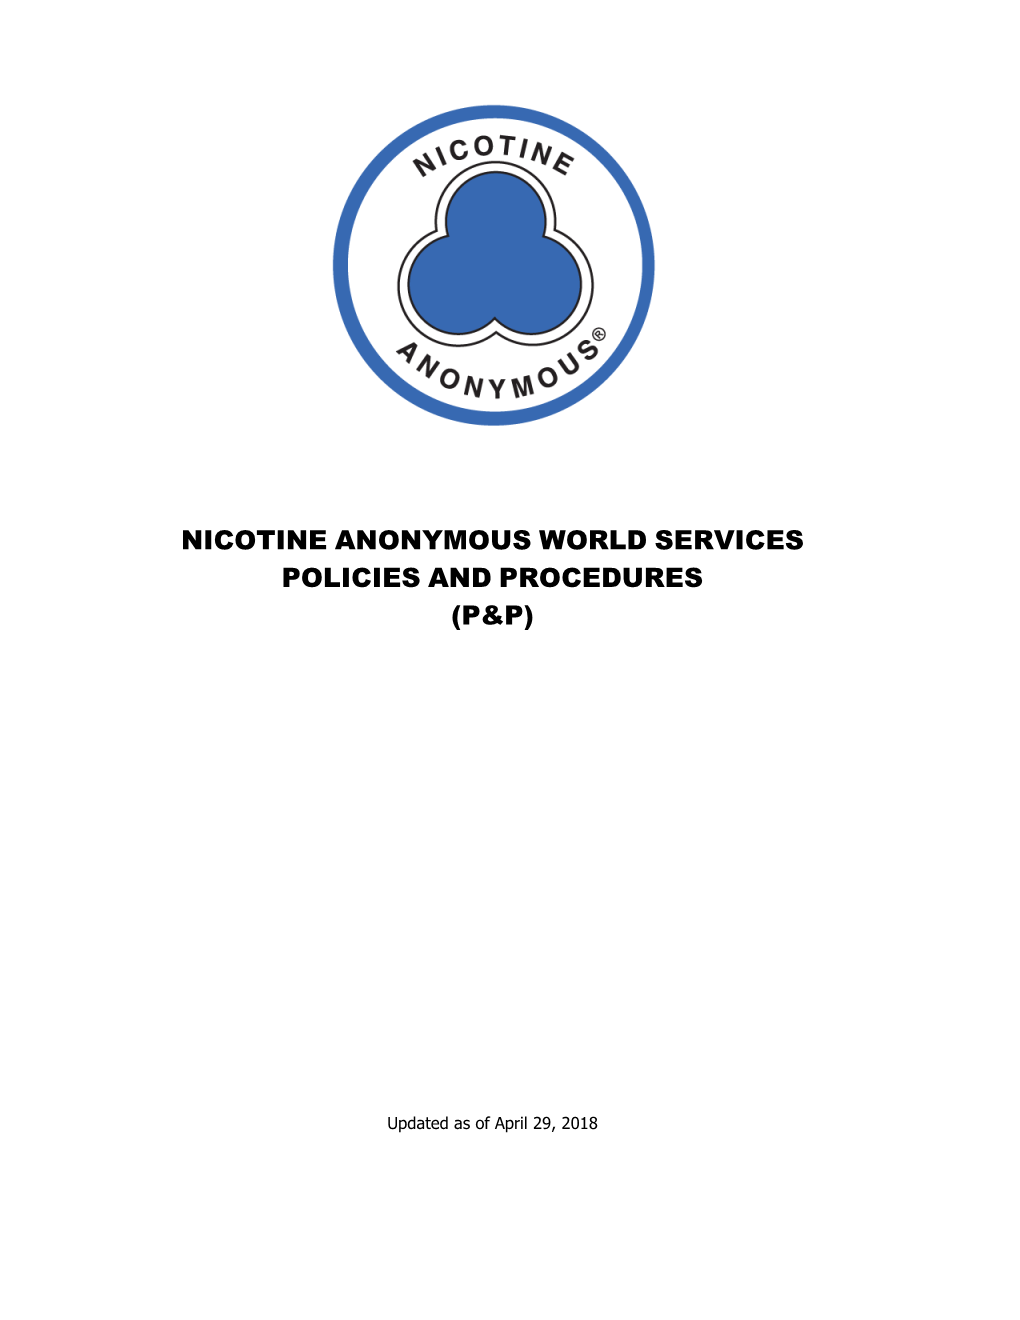 Nicotine Anonymous World Services Policies and Procedures (P&P)